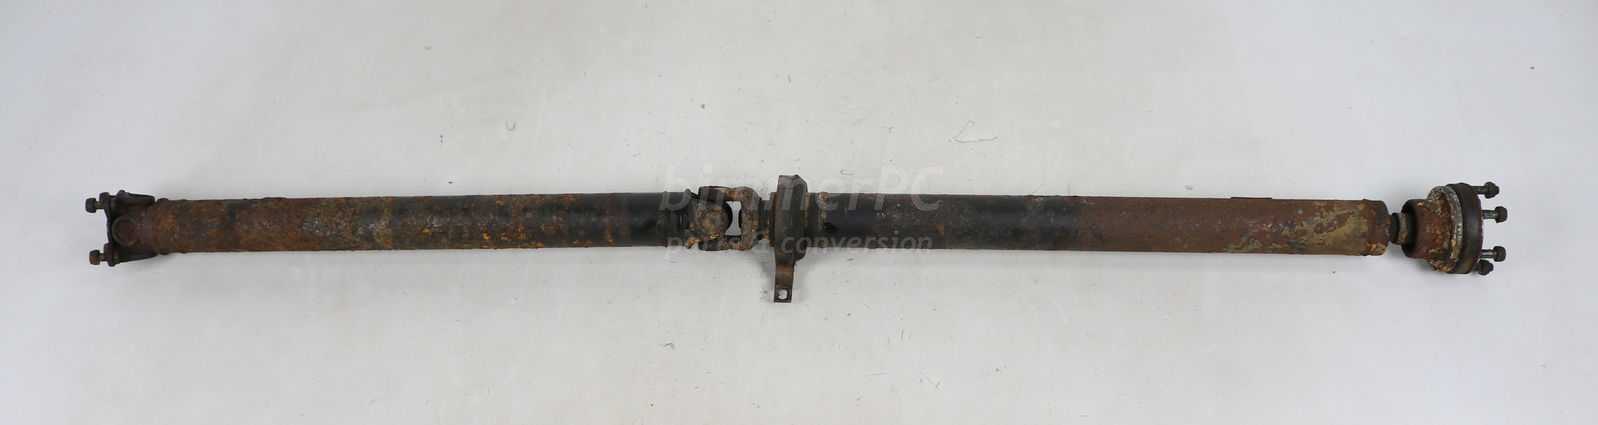 Picture of BMW 26111226218 Automatic Transmission Driveshaft E32 735i Early for sale